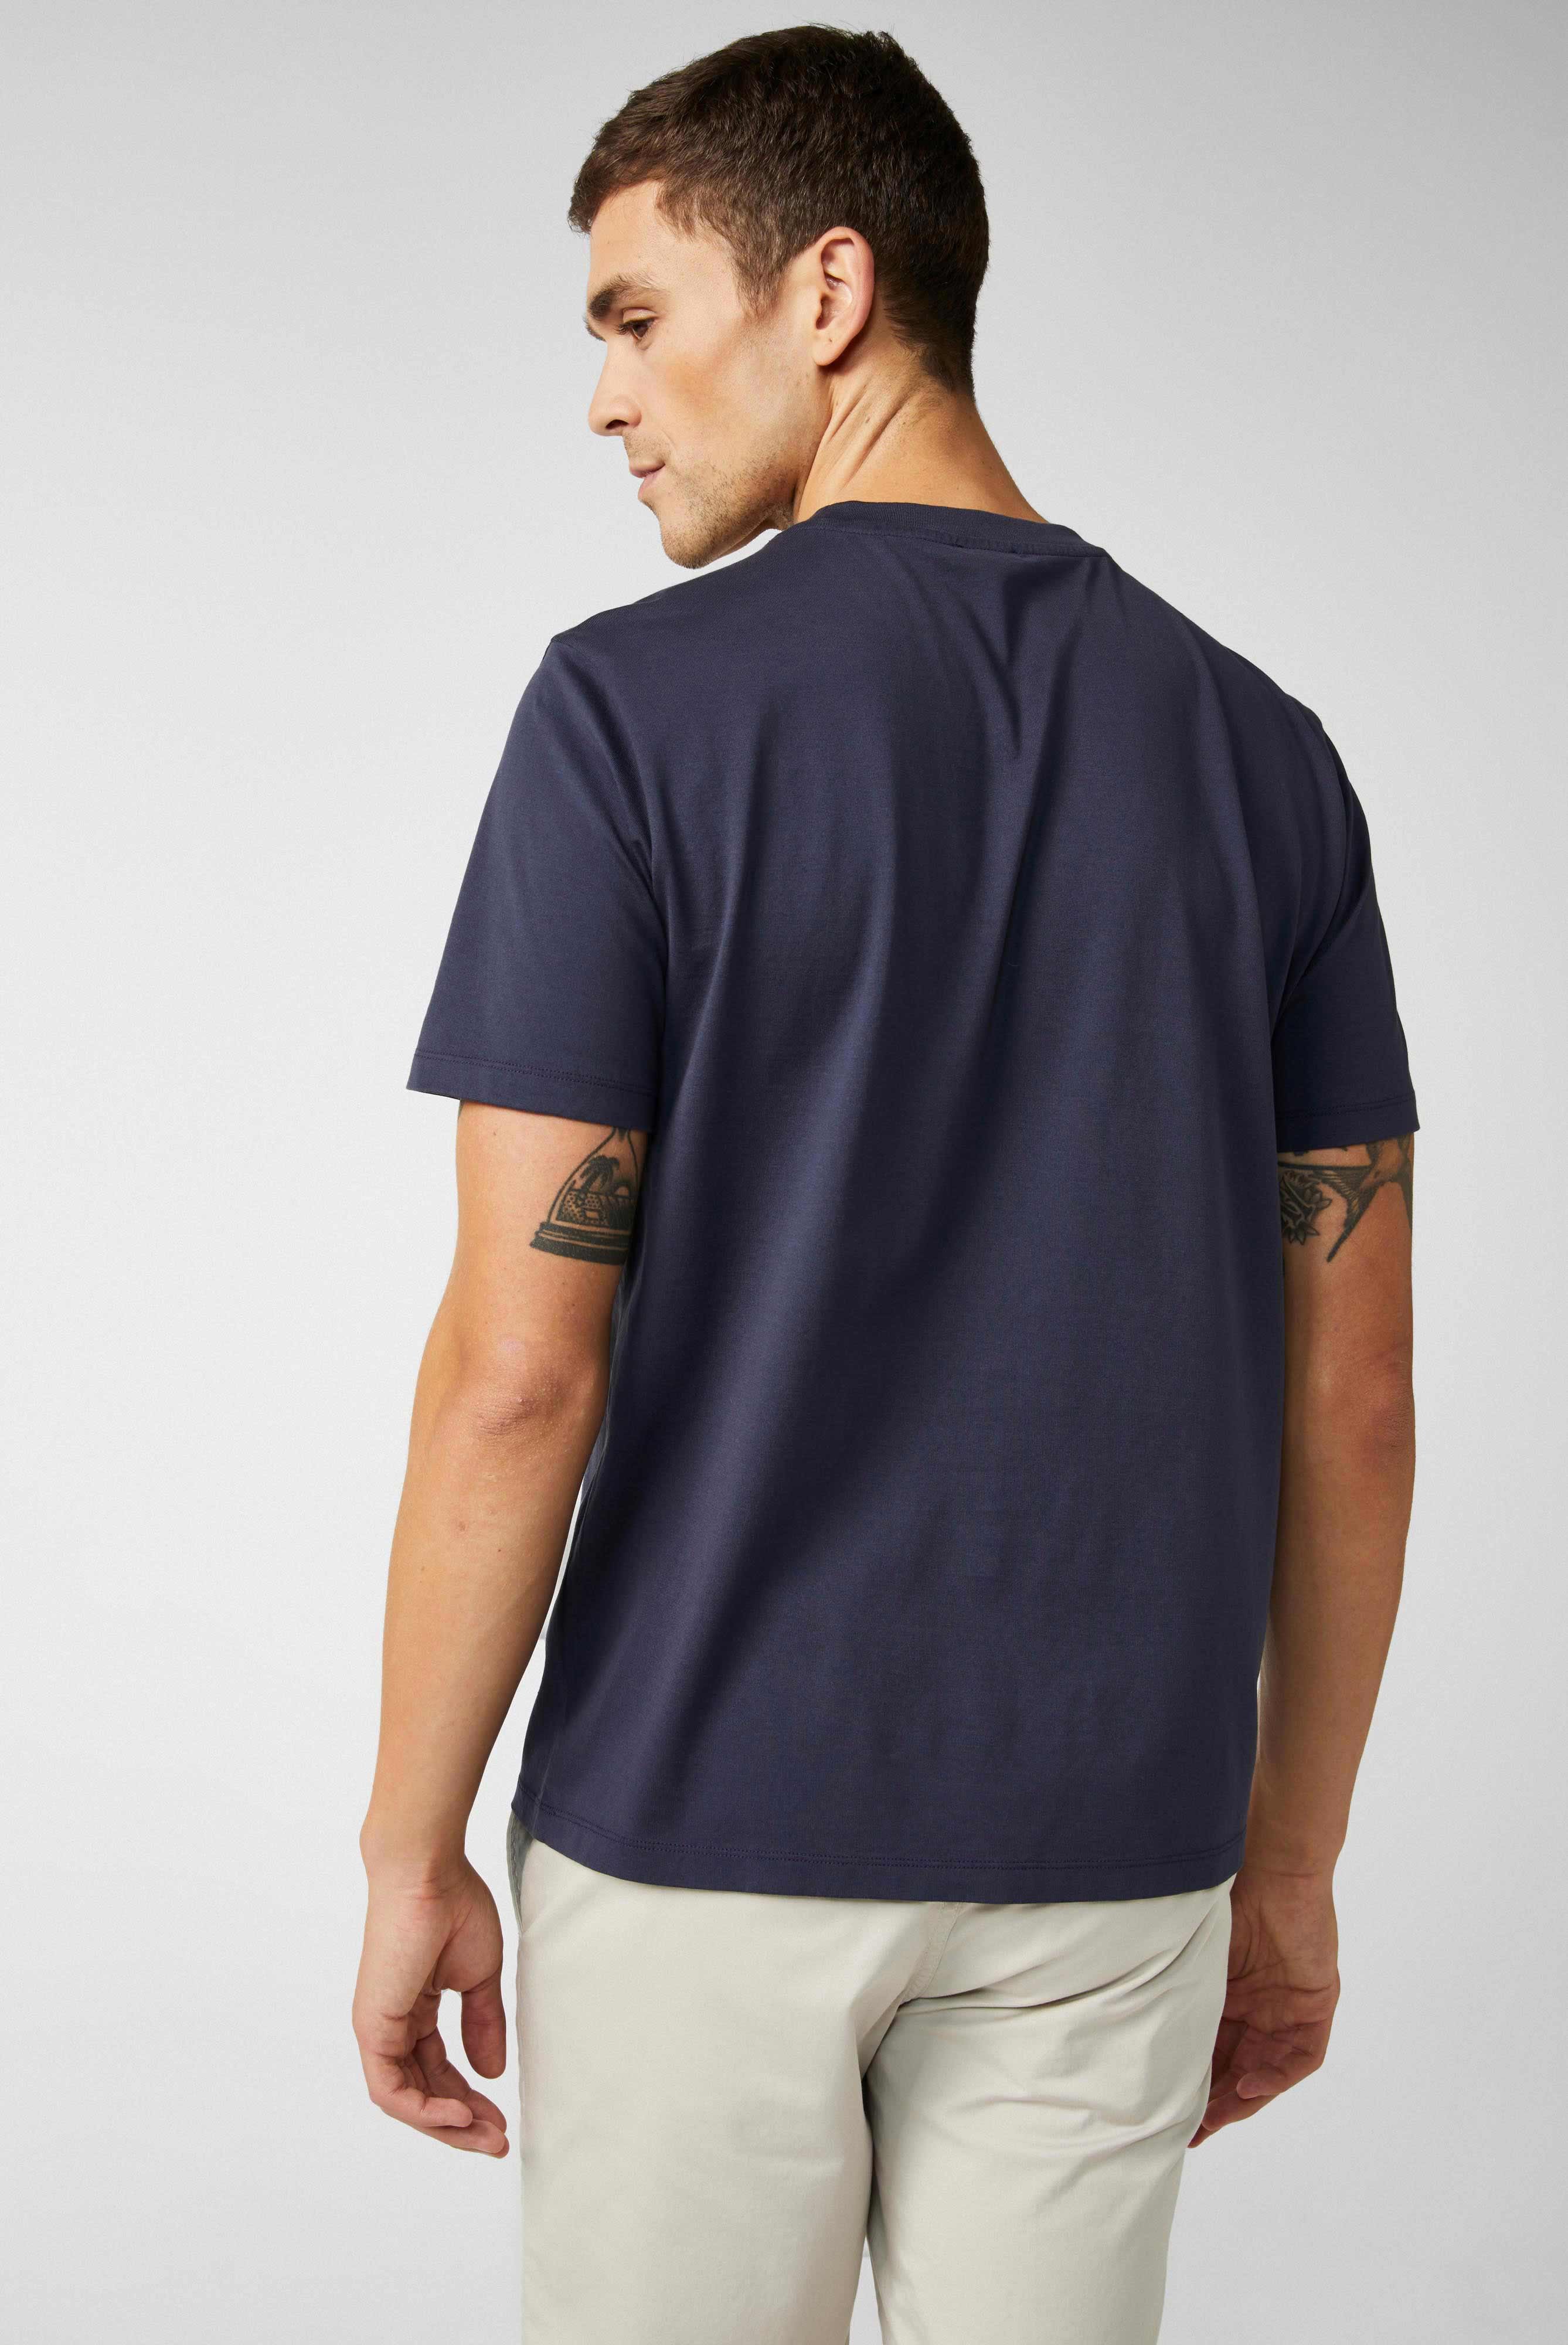 T-Shirts+Relaxed Fit Crew Neck Jersey T-Shirt+20.1660..Z20044.790.S